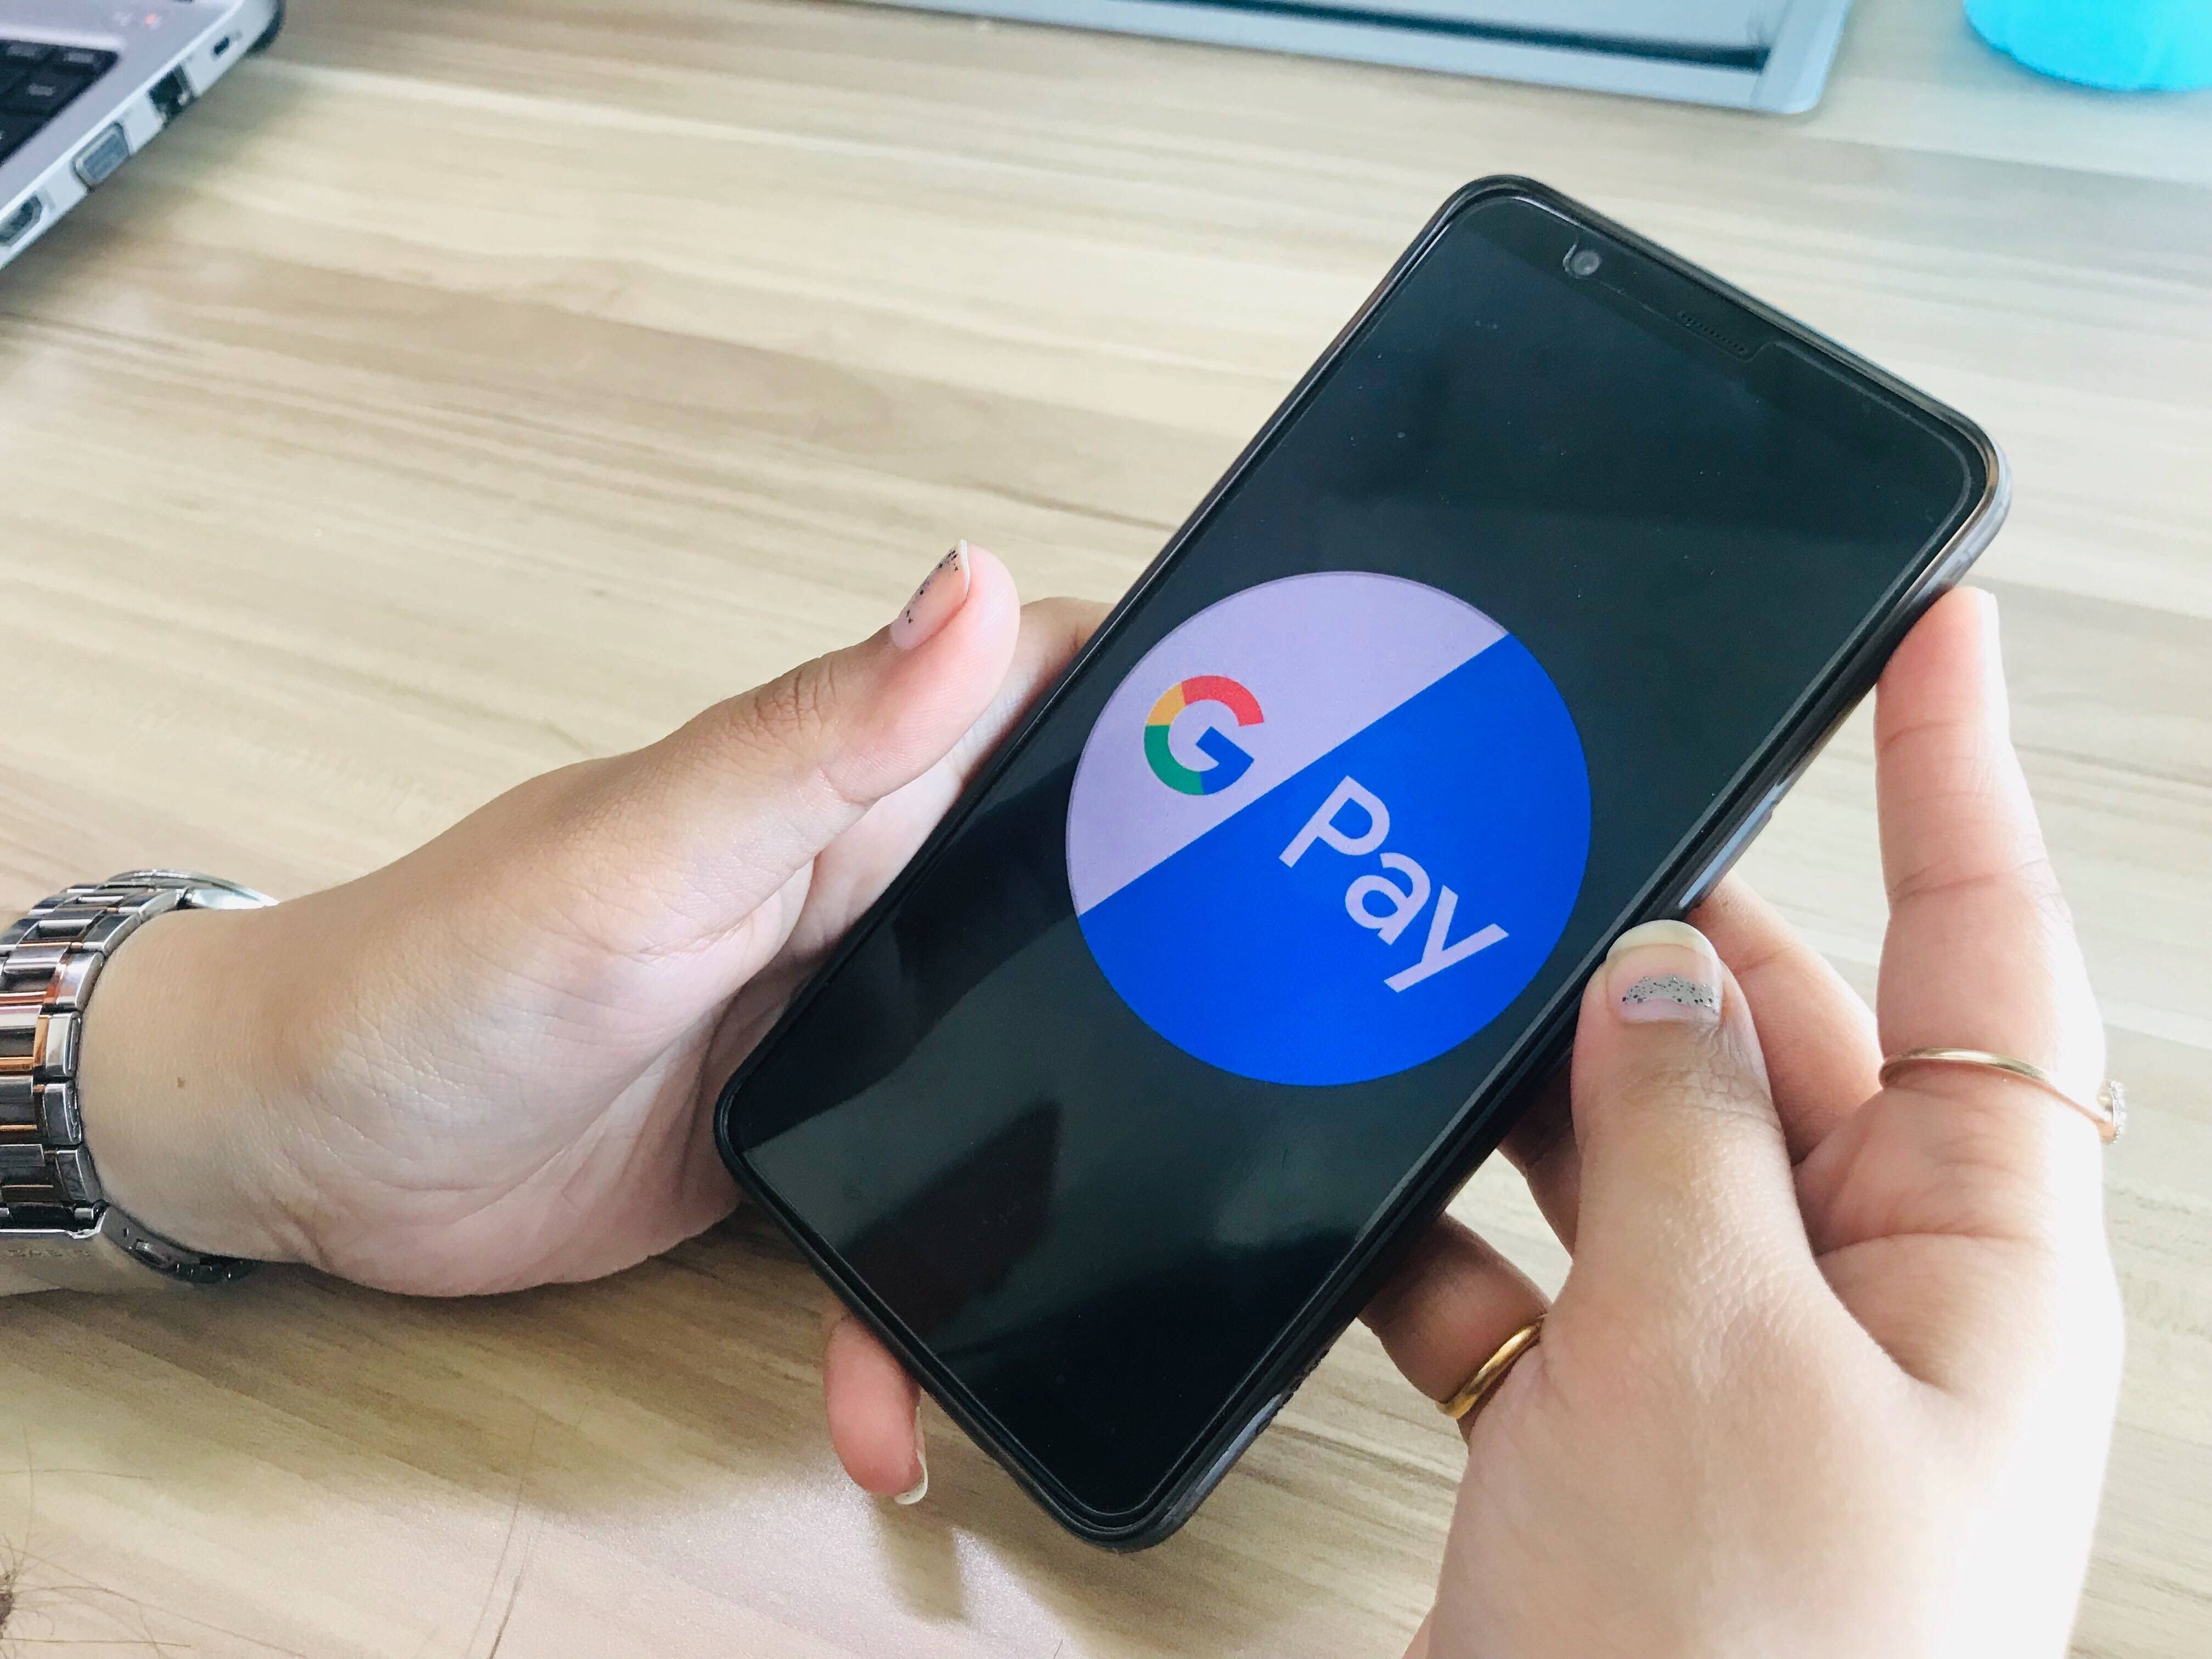 Google Pay wants to offer Indians their favourite investment option – gold